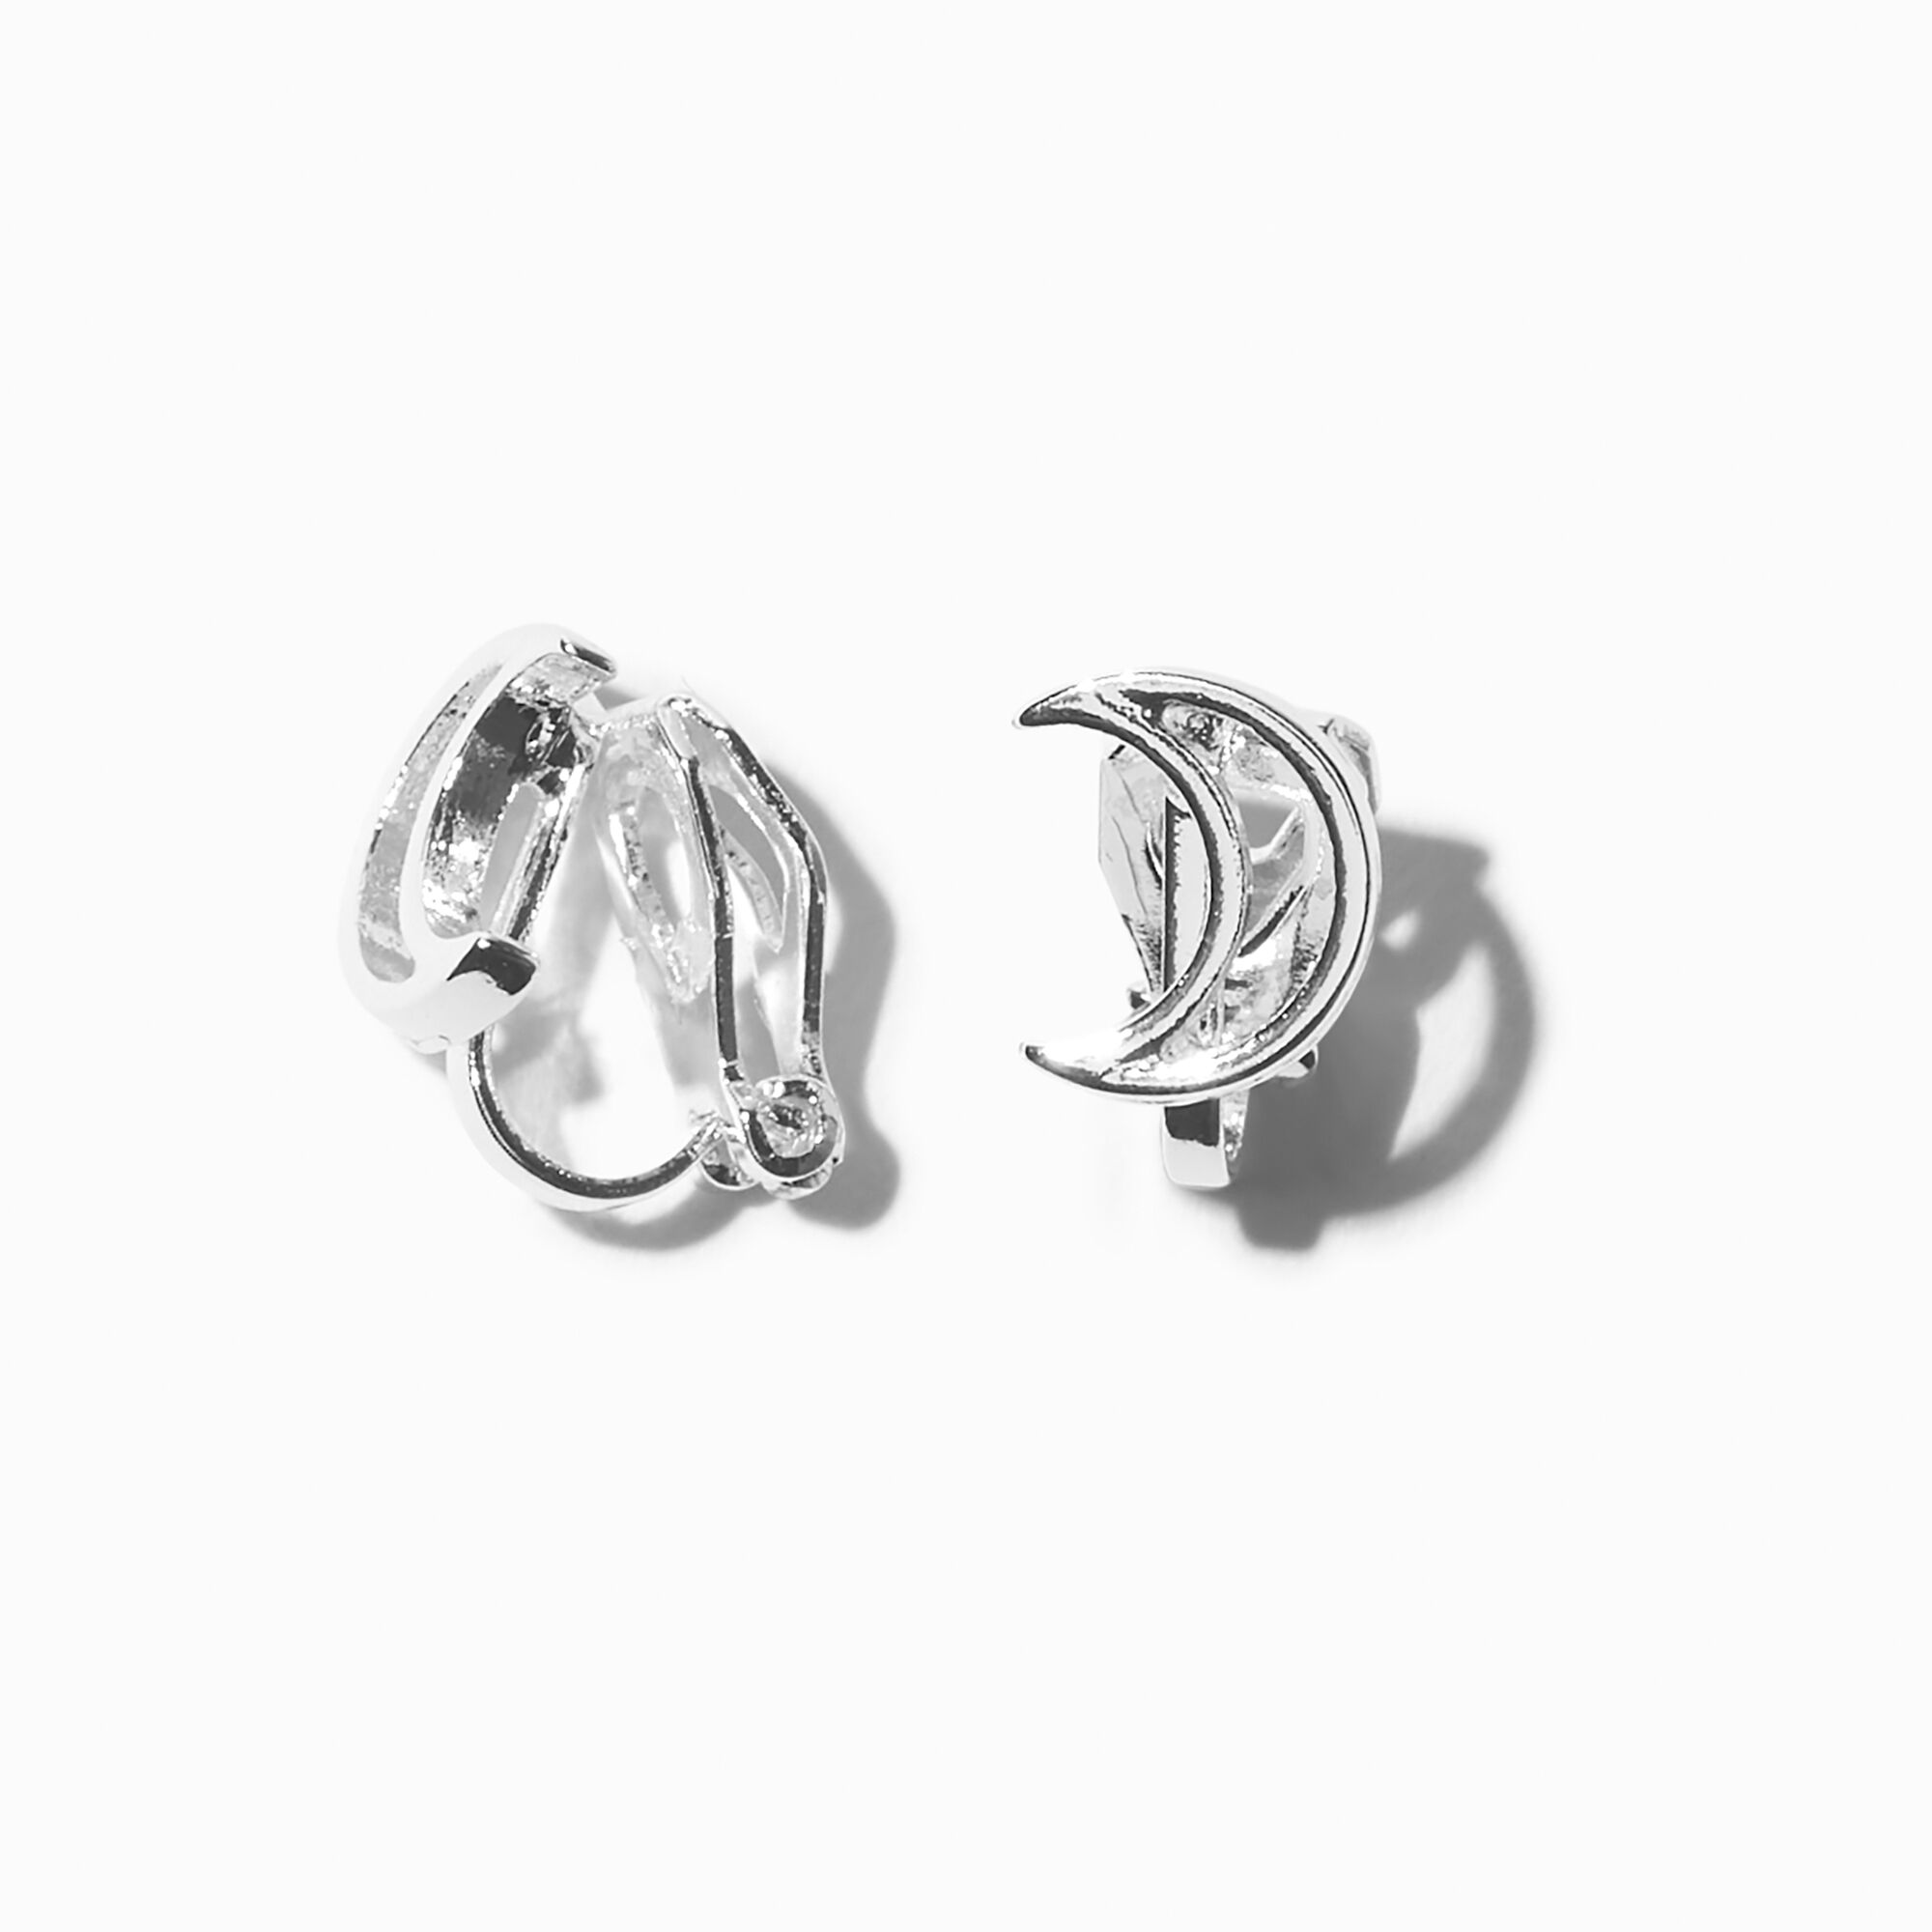 View Claires Tone Open Moon ClipOn Earrings Silver information